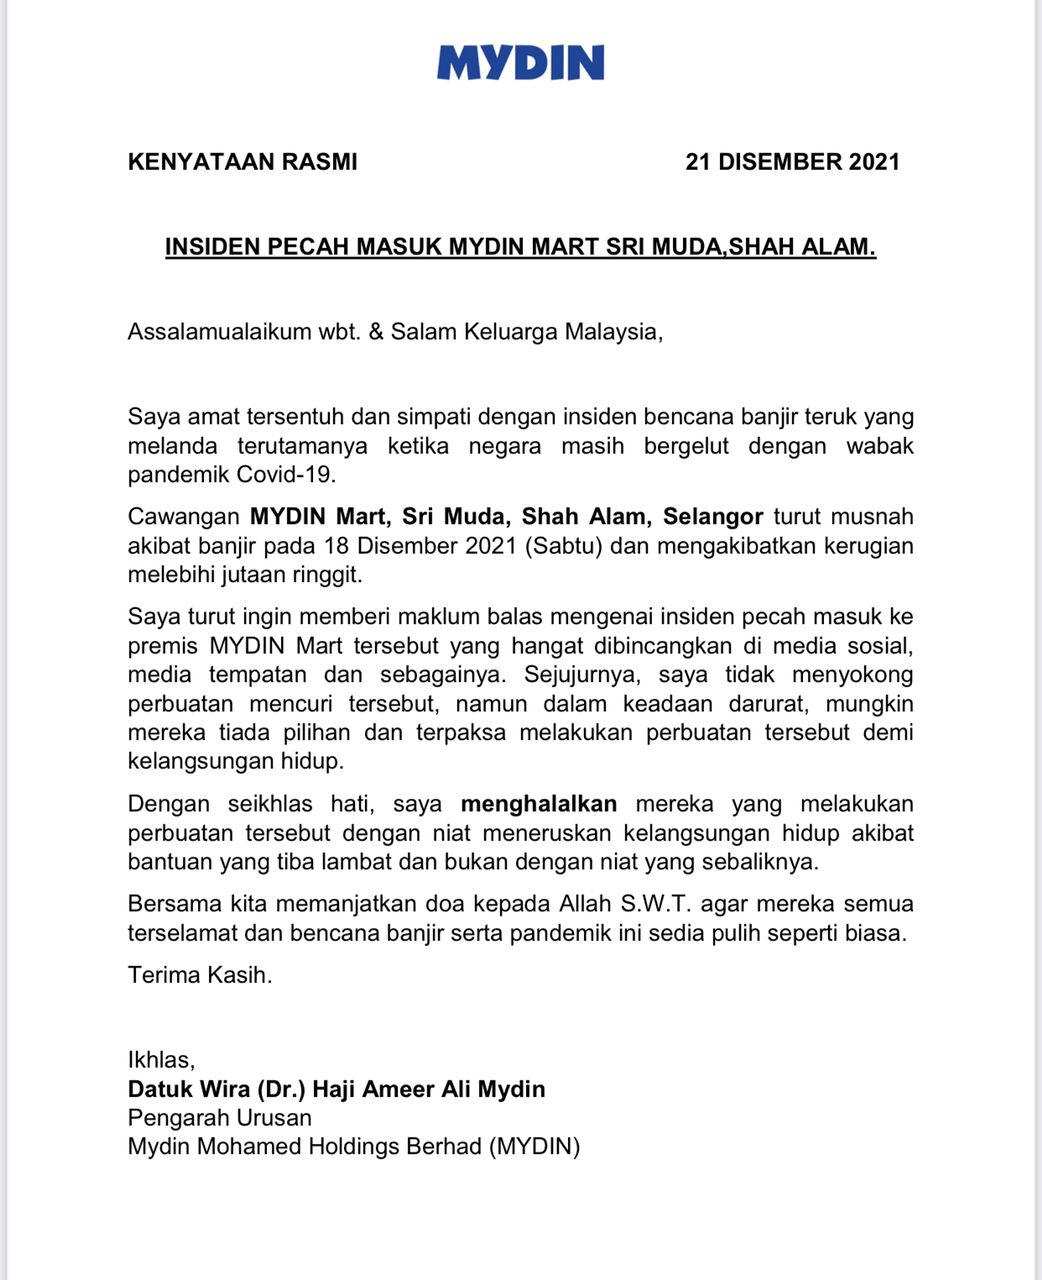 A statement from MYDIN's founder regarding the thefts.